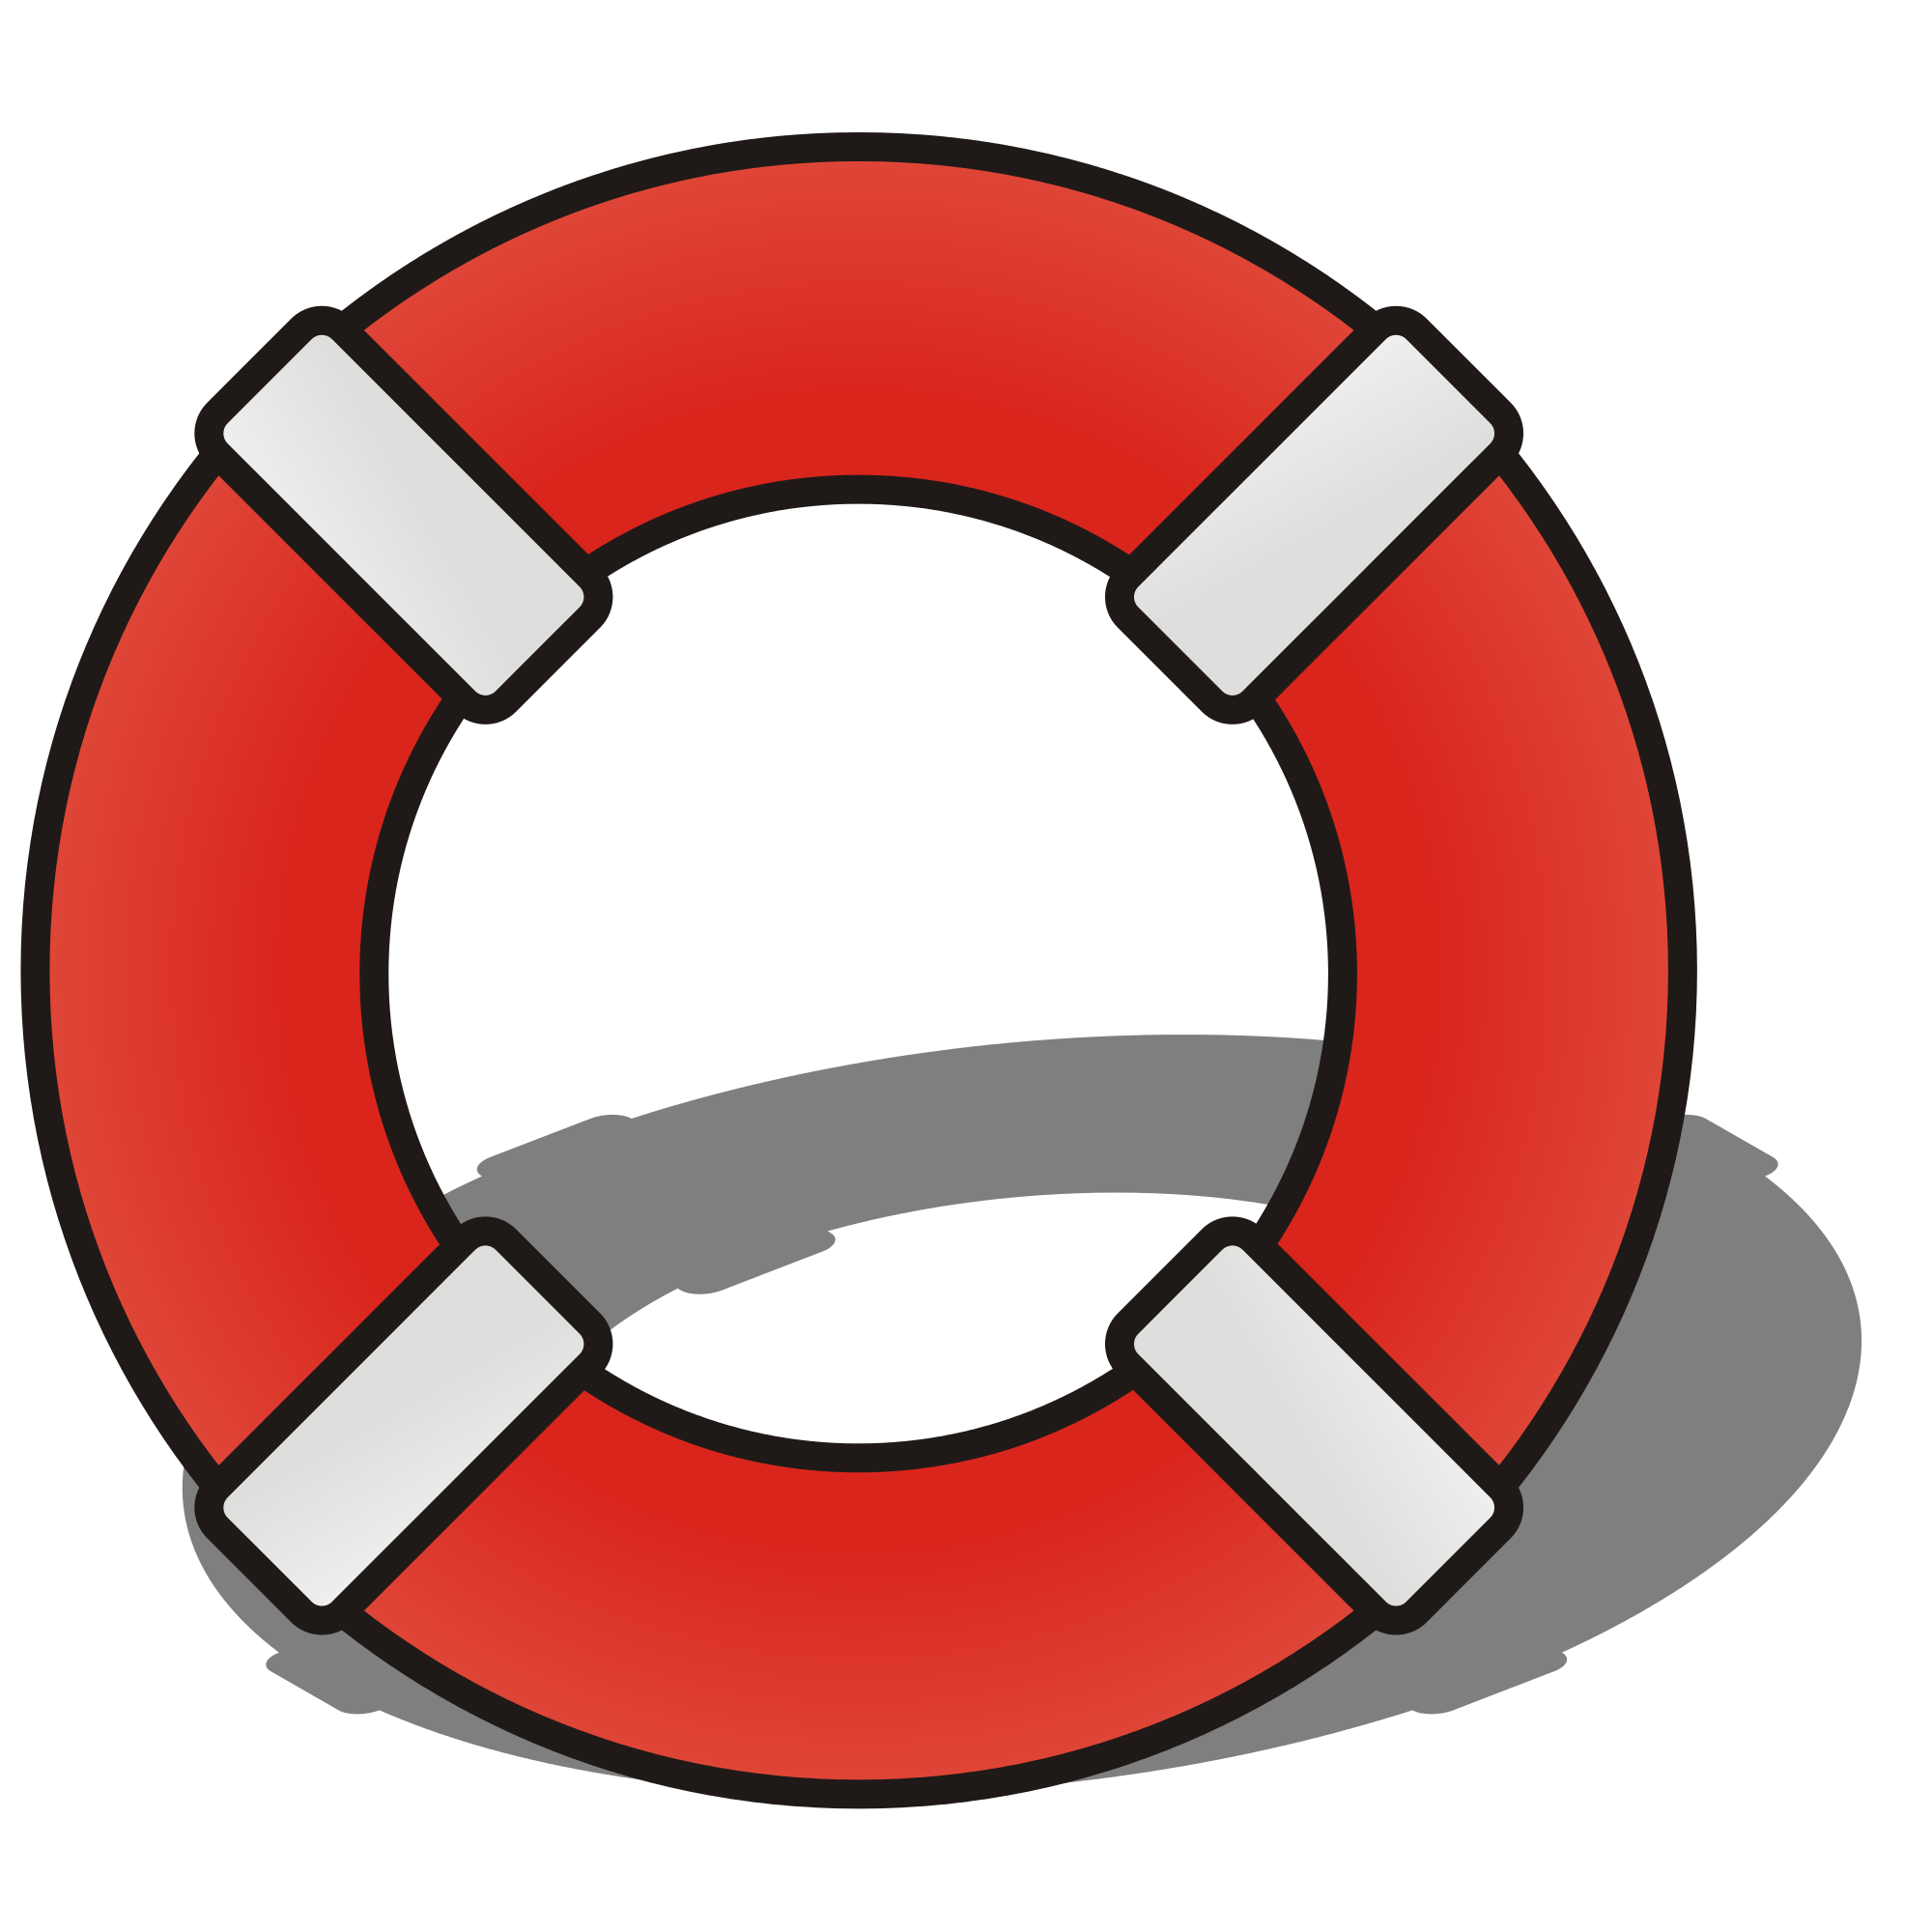 Picture #1544068 - lifeguard clipart life preserver. 